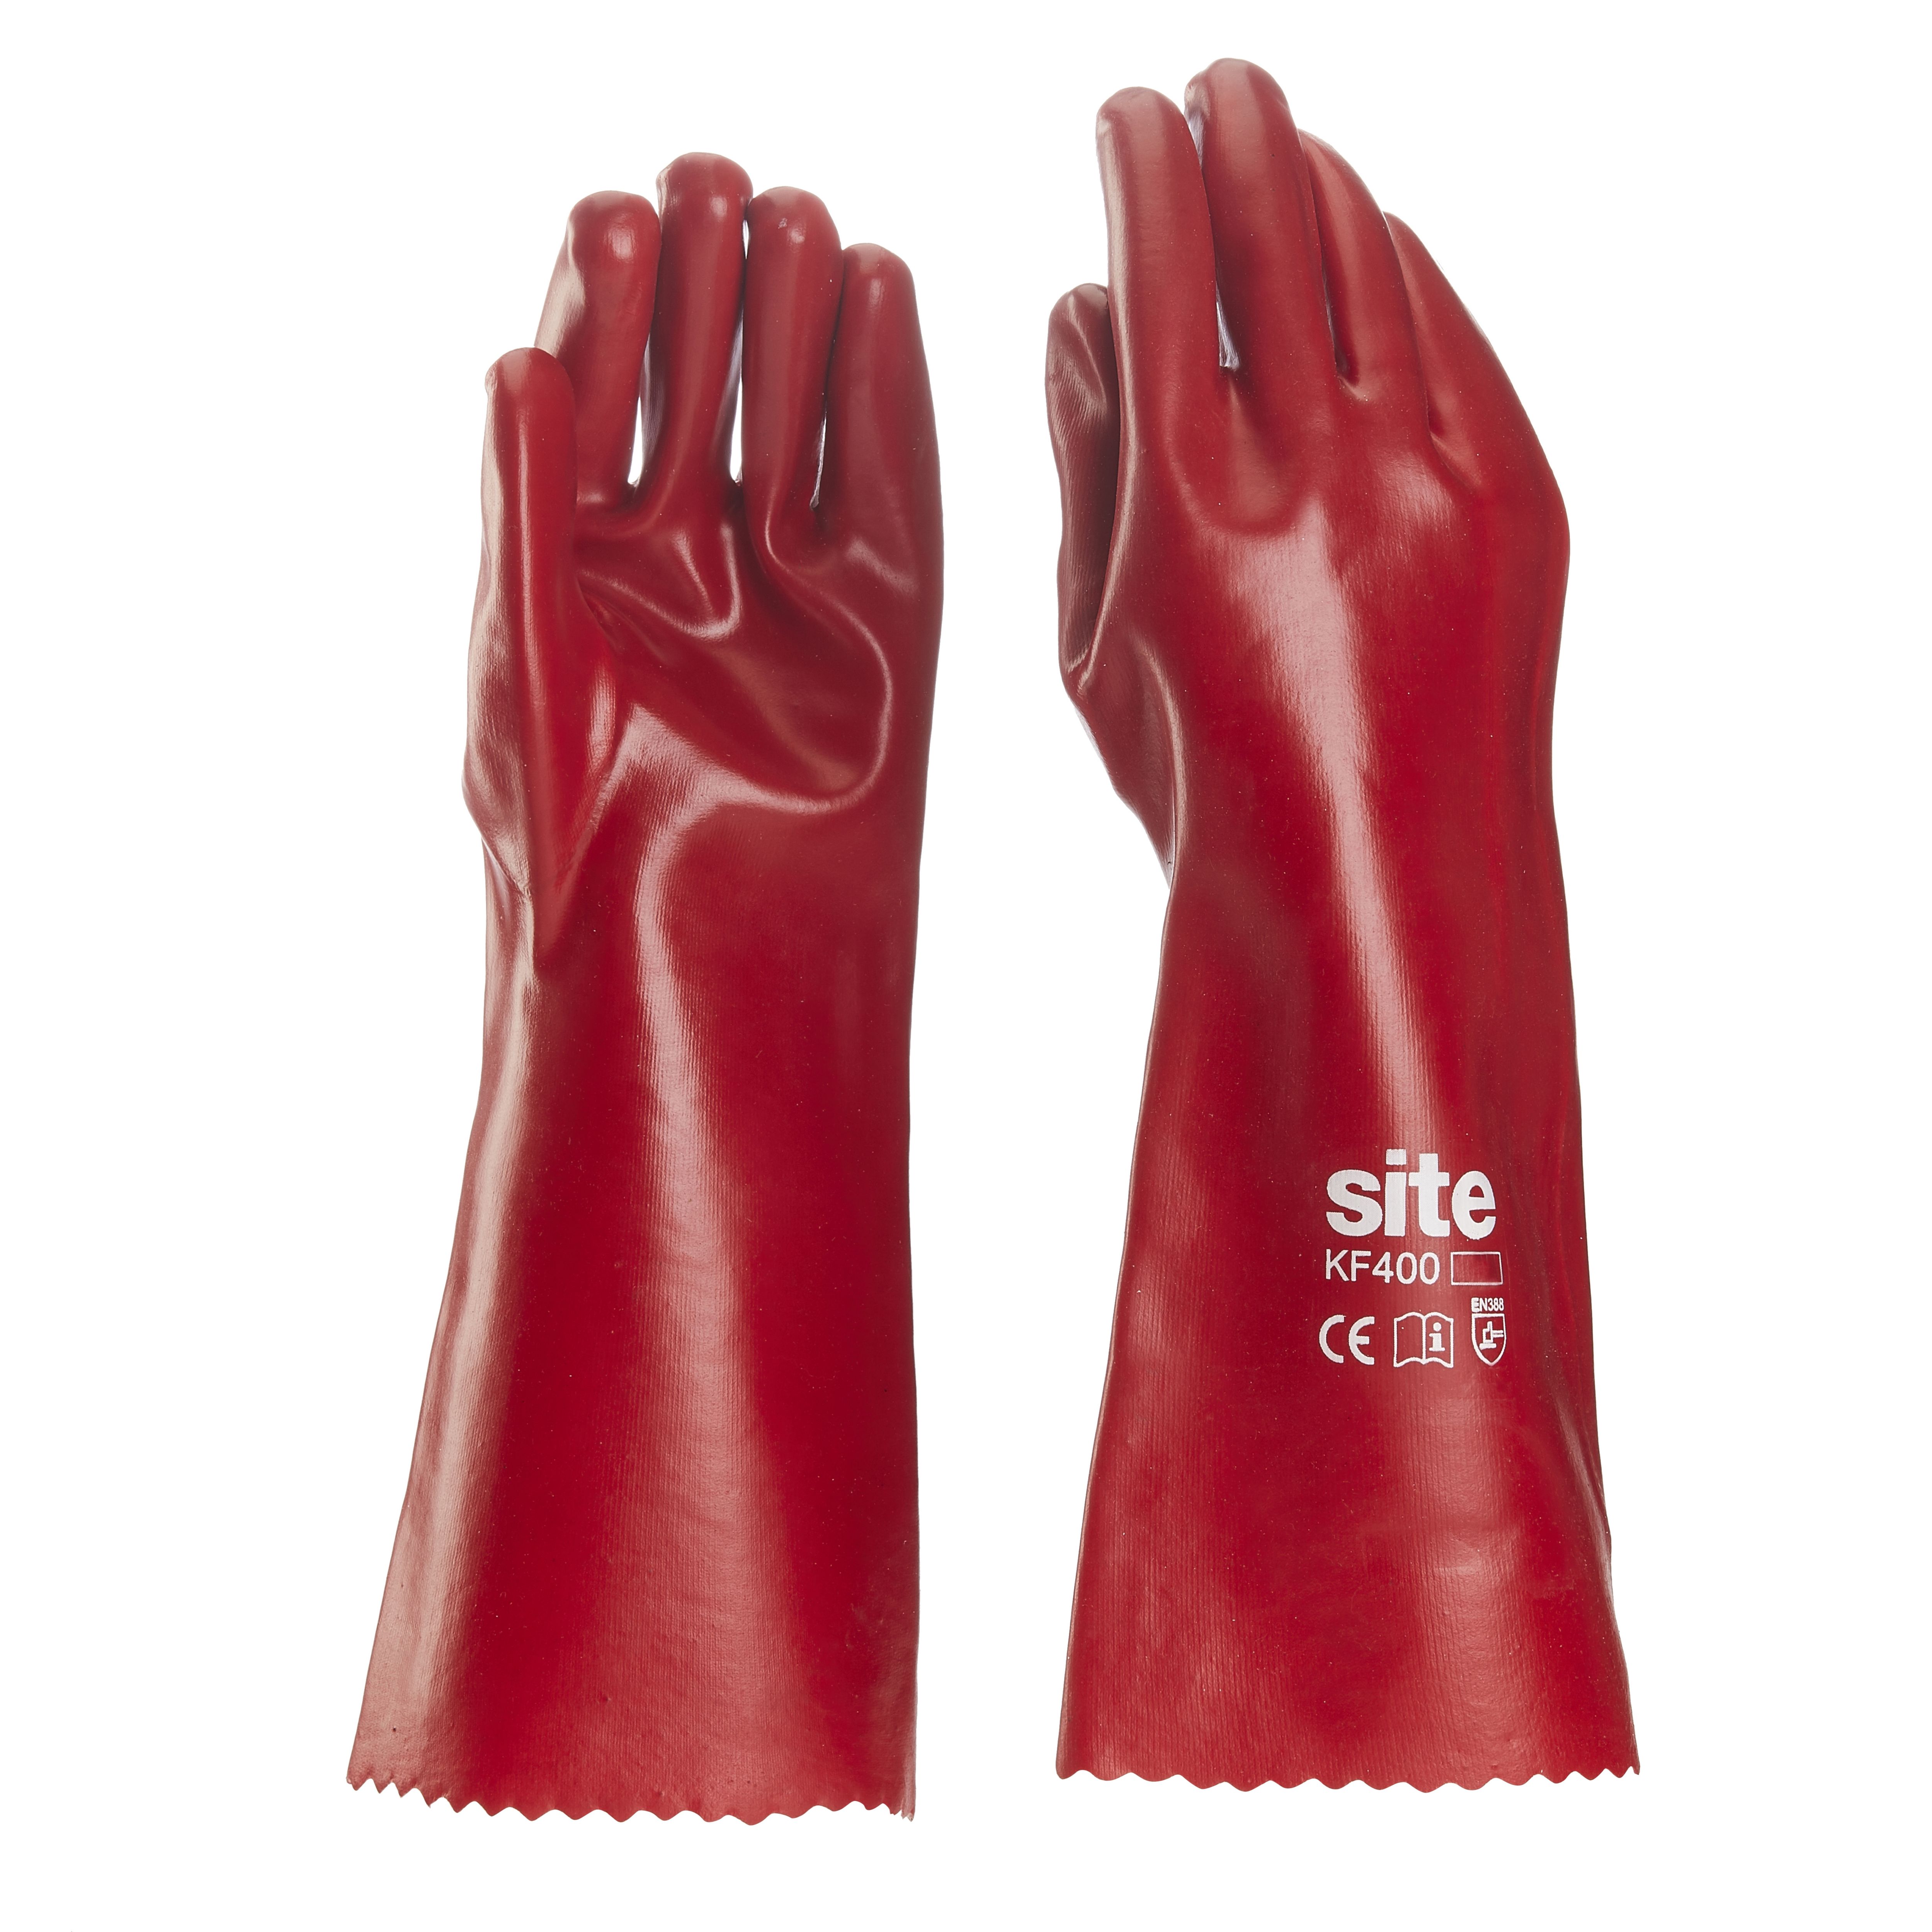 Site Red PVC Gauntlets, Large